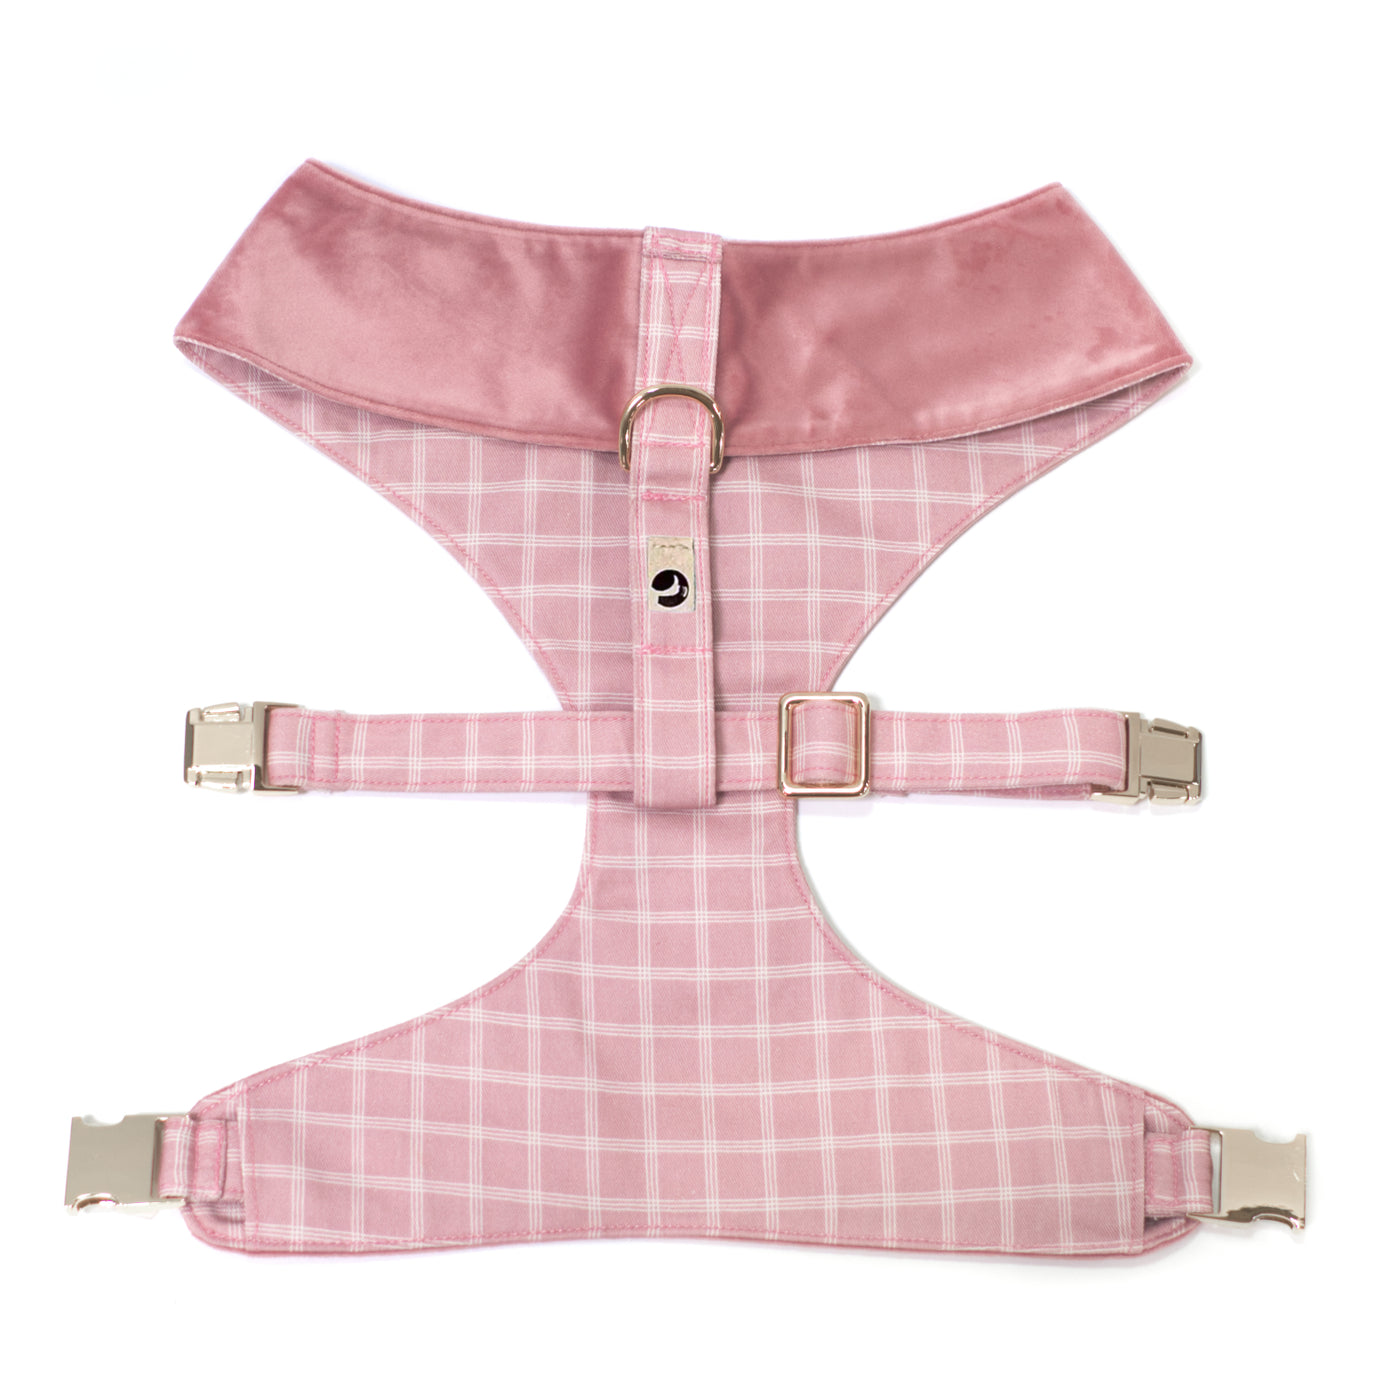 Wag & Wonder reversible dog harness in pink velvet and plaid shown from top/back